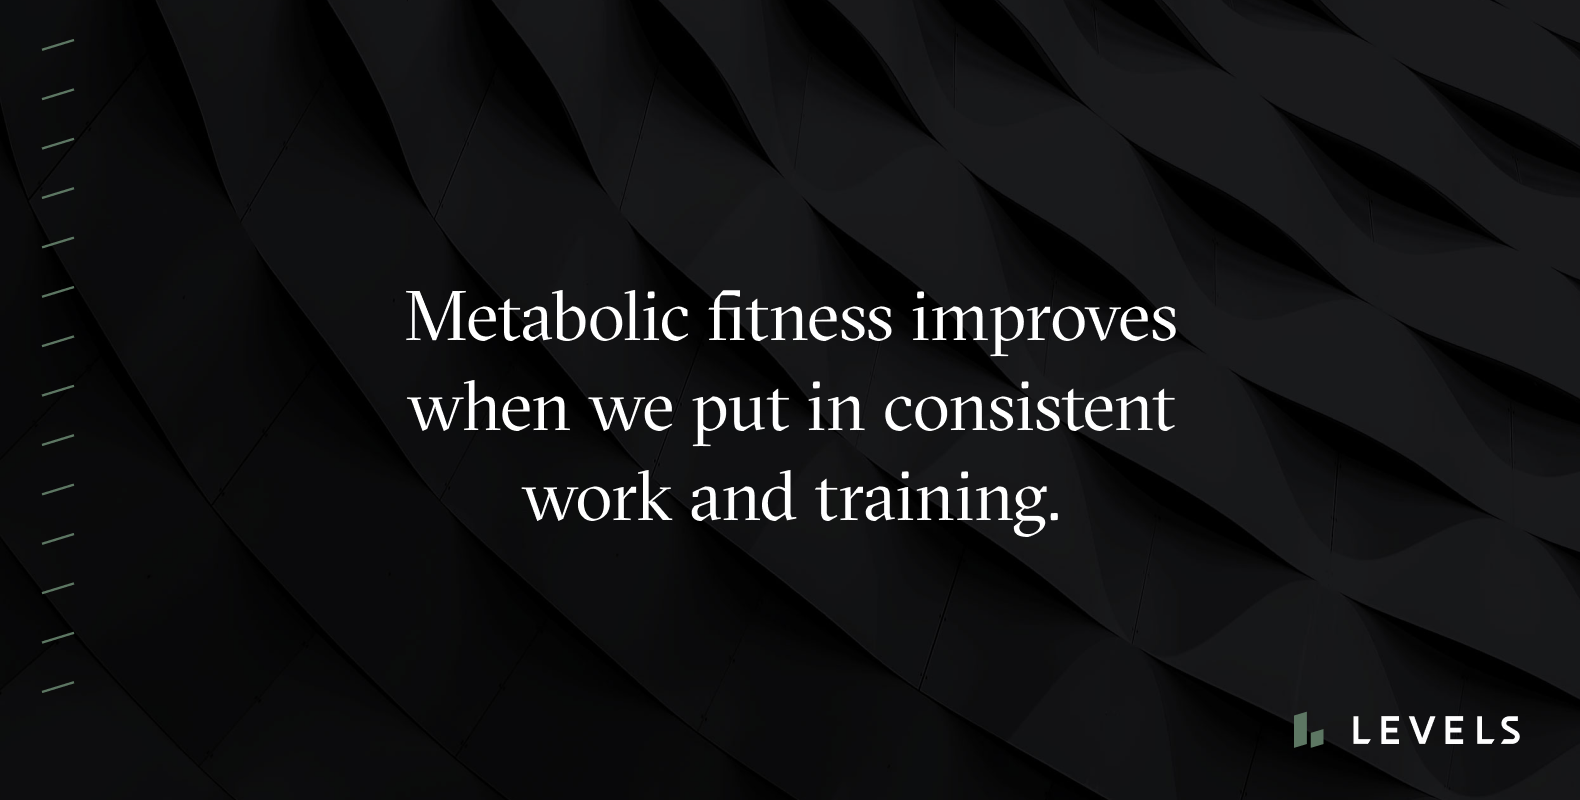 quote metabolic fitness improves when we put in consistent work and training